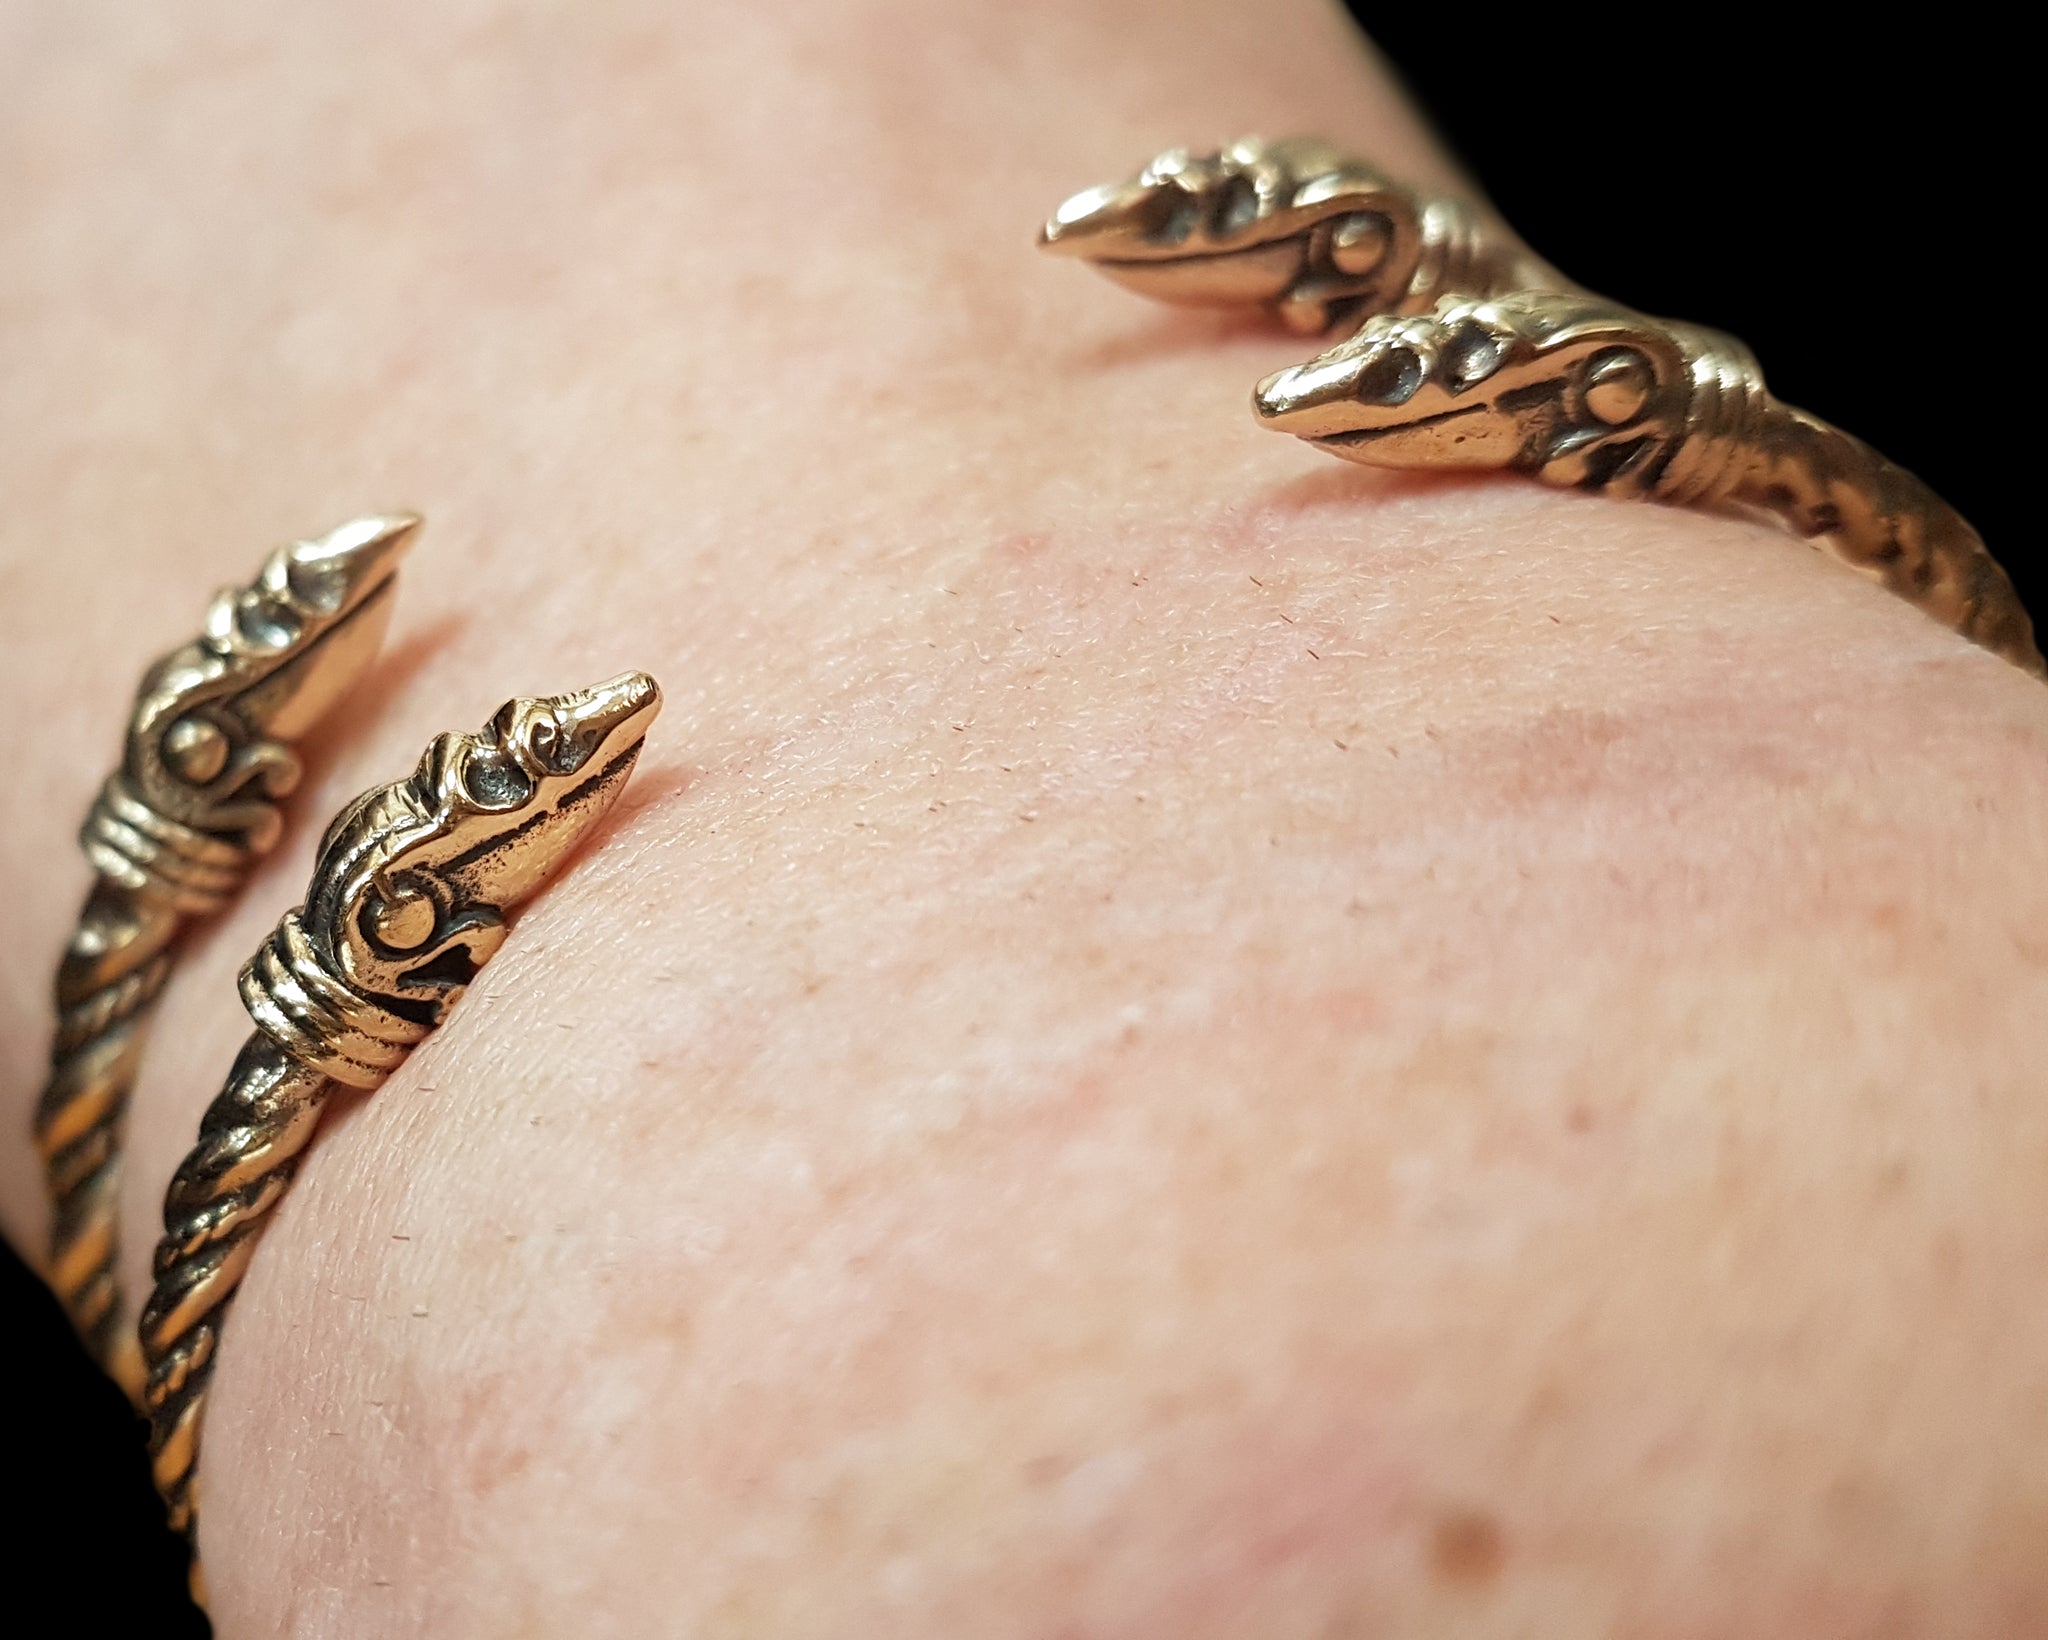 Twisted Bronze Bracelets With Raven Heads on Wrists Side View